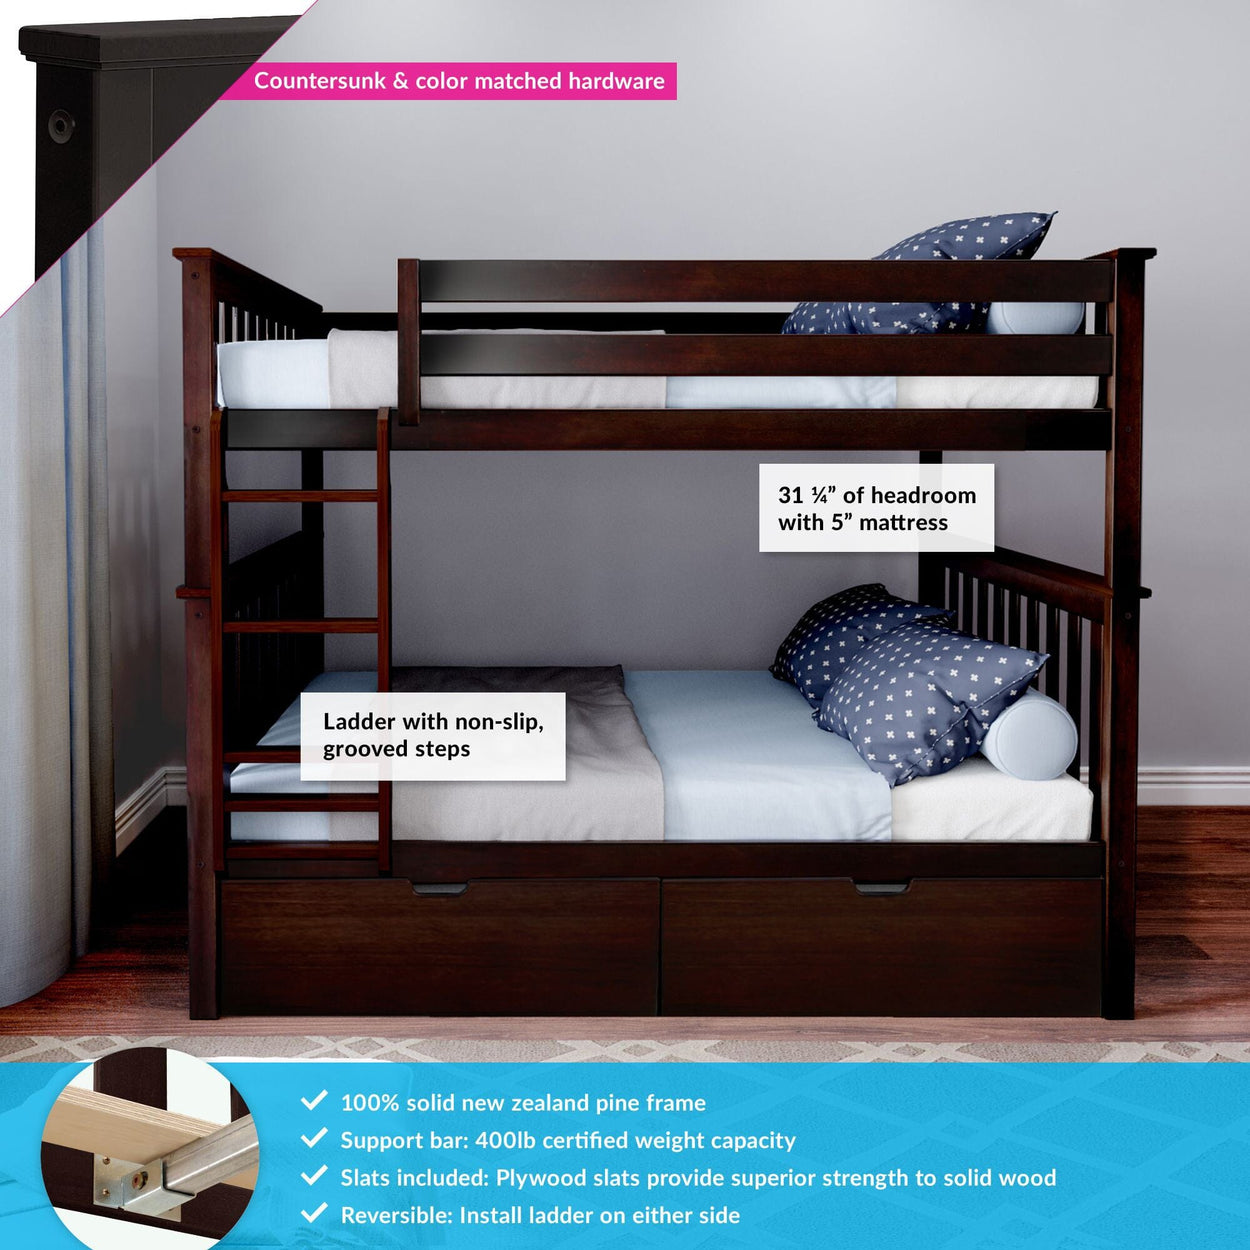 187251-005 : Bunk Beds Full Over Full Bunk Bed With Storage Drawers, Espresso